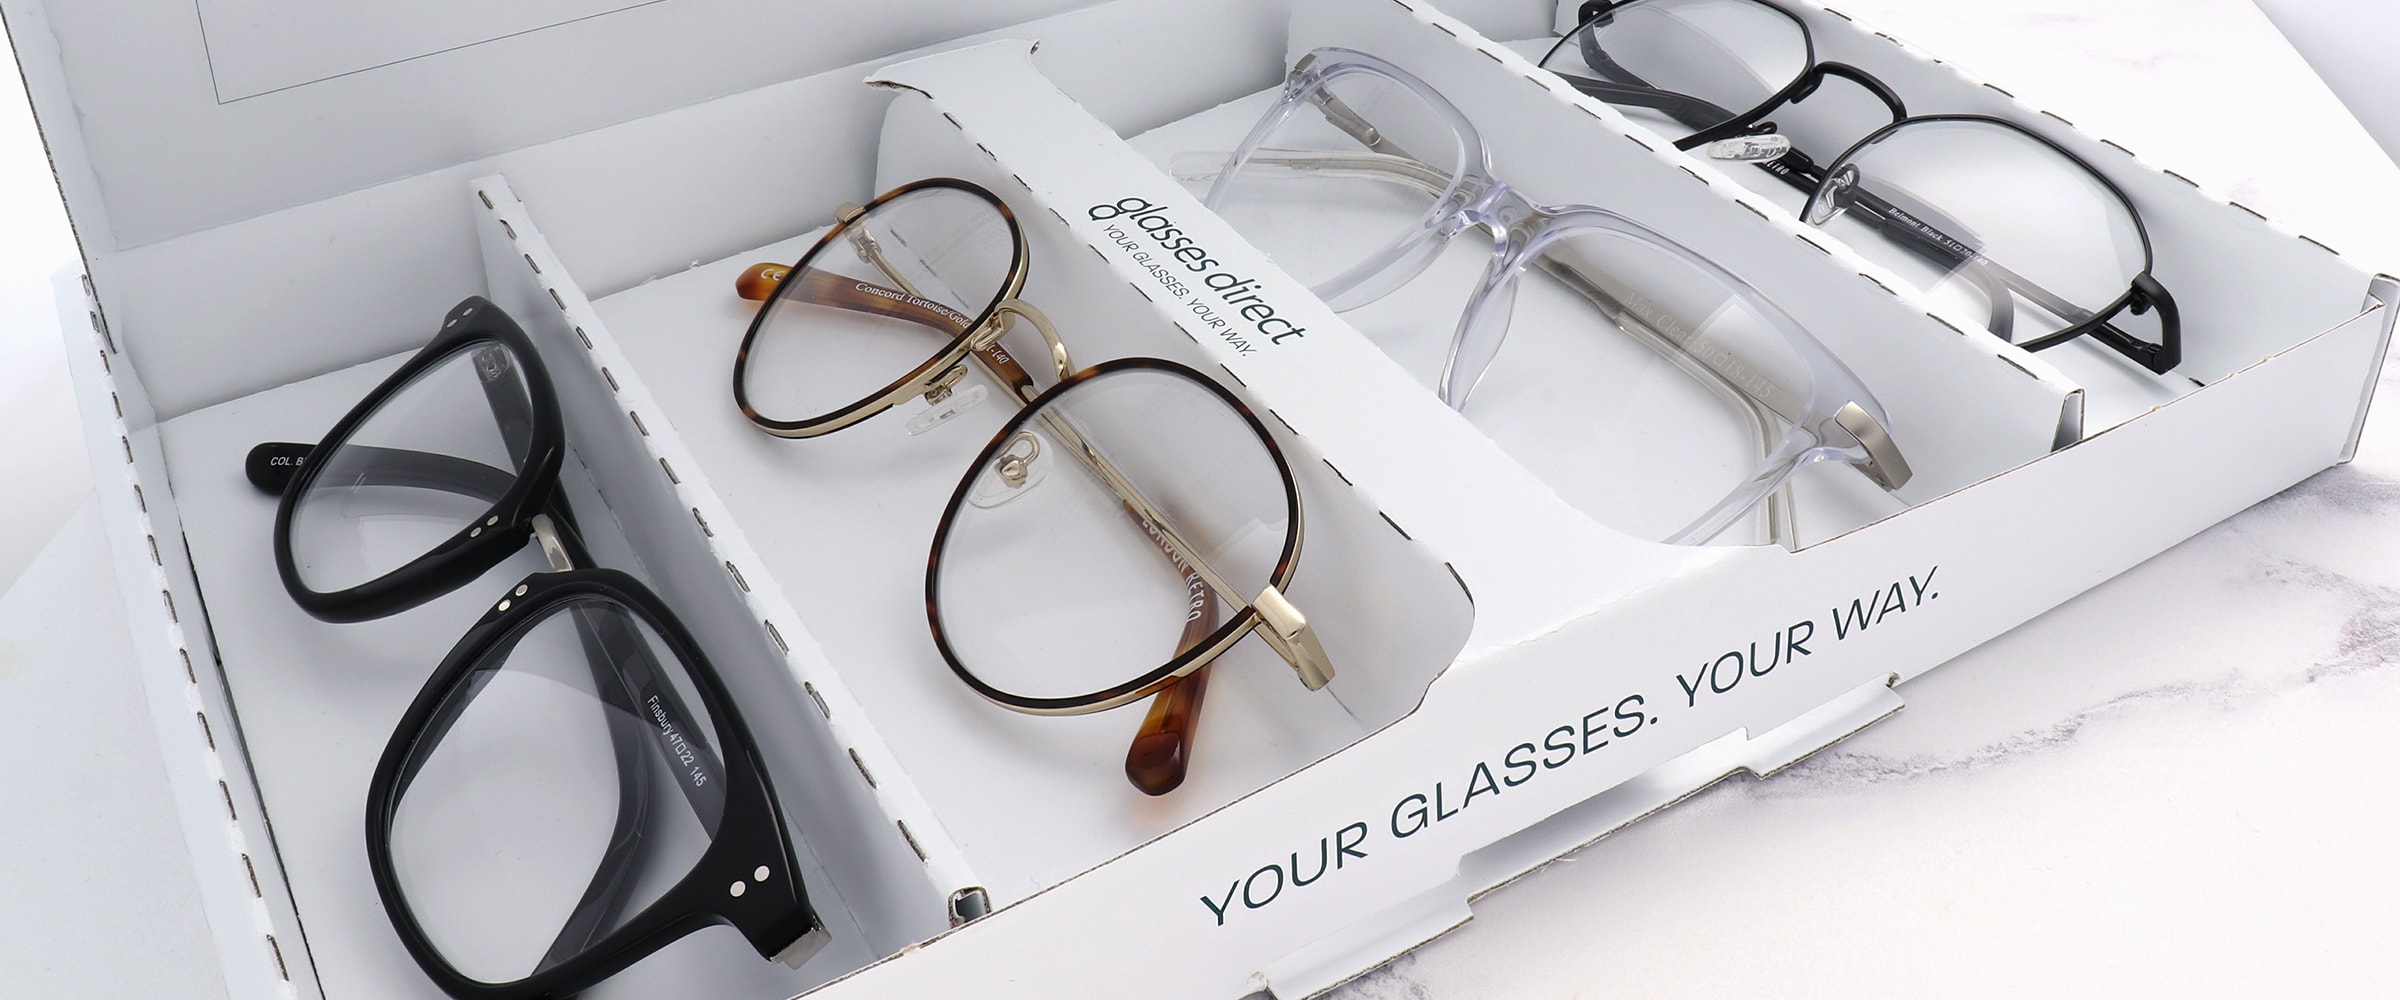 Frames in a Glasses Direct home trial box